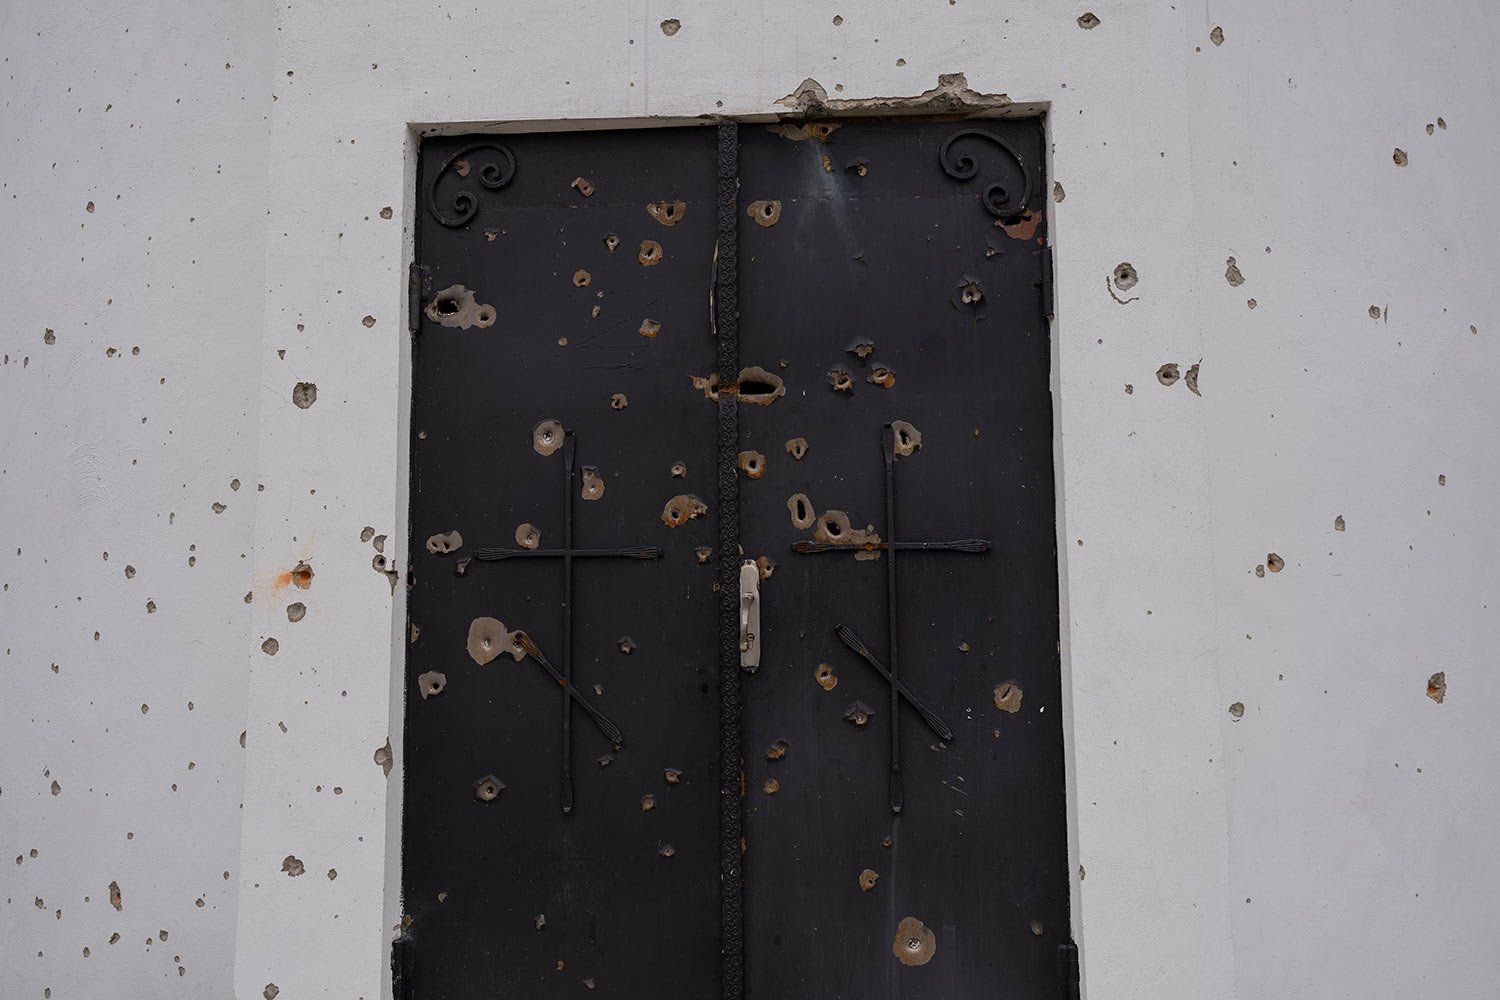  A door of a church is damaged from shrapnel following a Russian attack in the previous weeks, in the town of Makarov, Kyiv region, Ukraine, on Sunday, April 10, 2022. (AP Photo/Petros Giannakouris) 